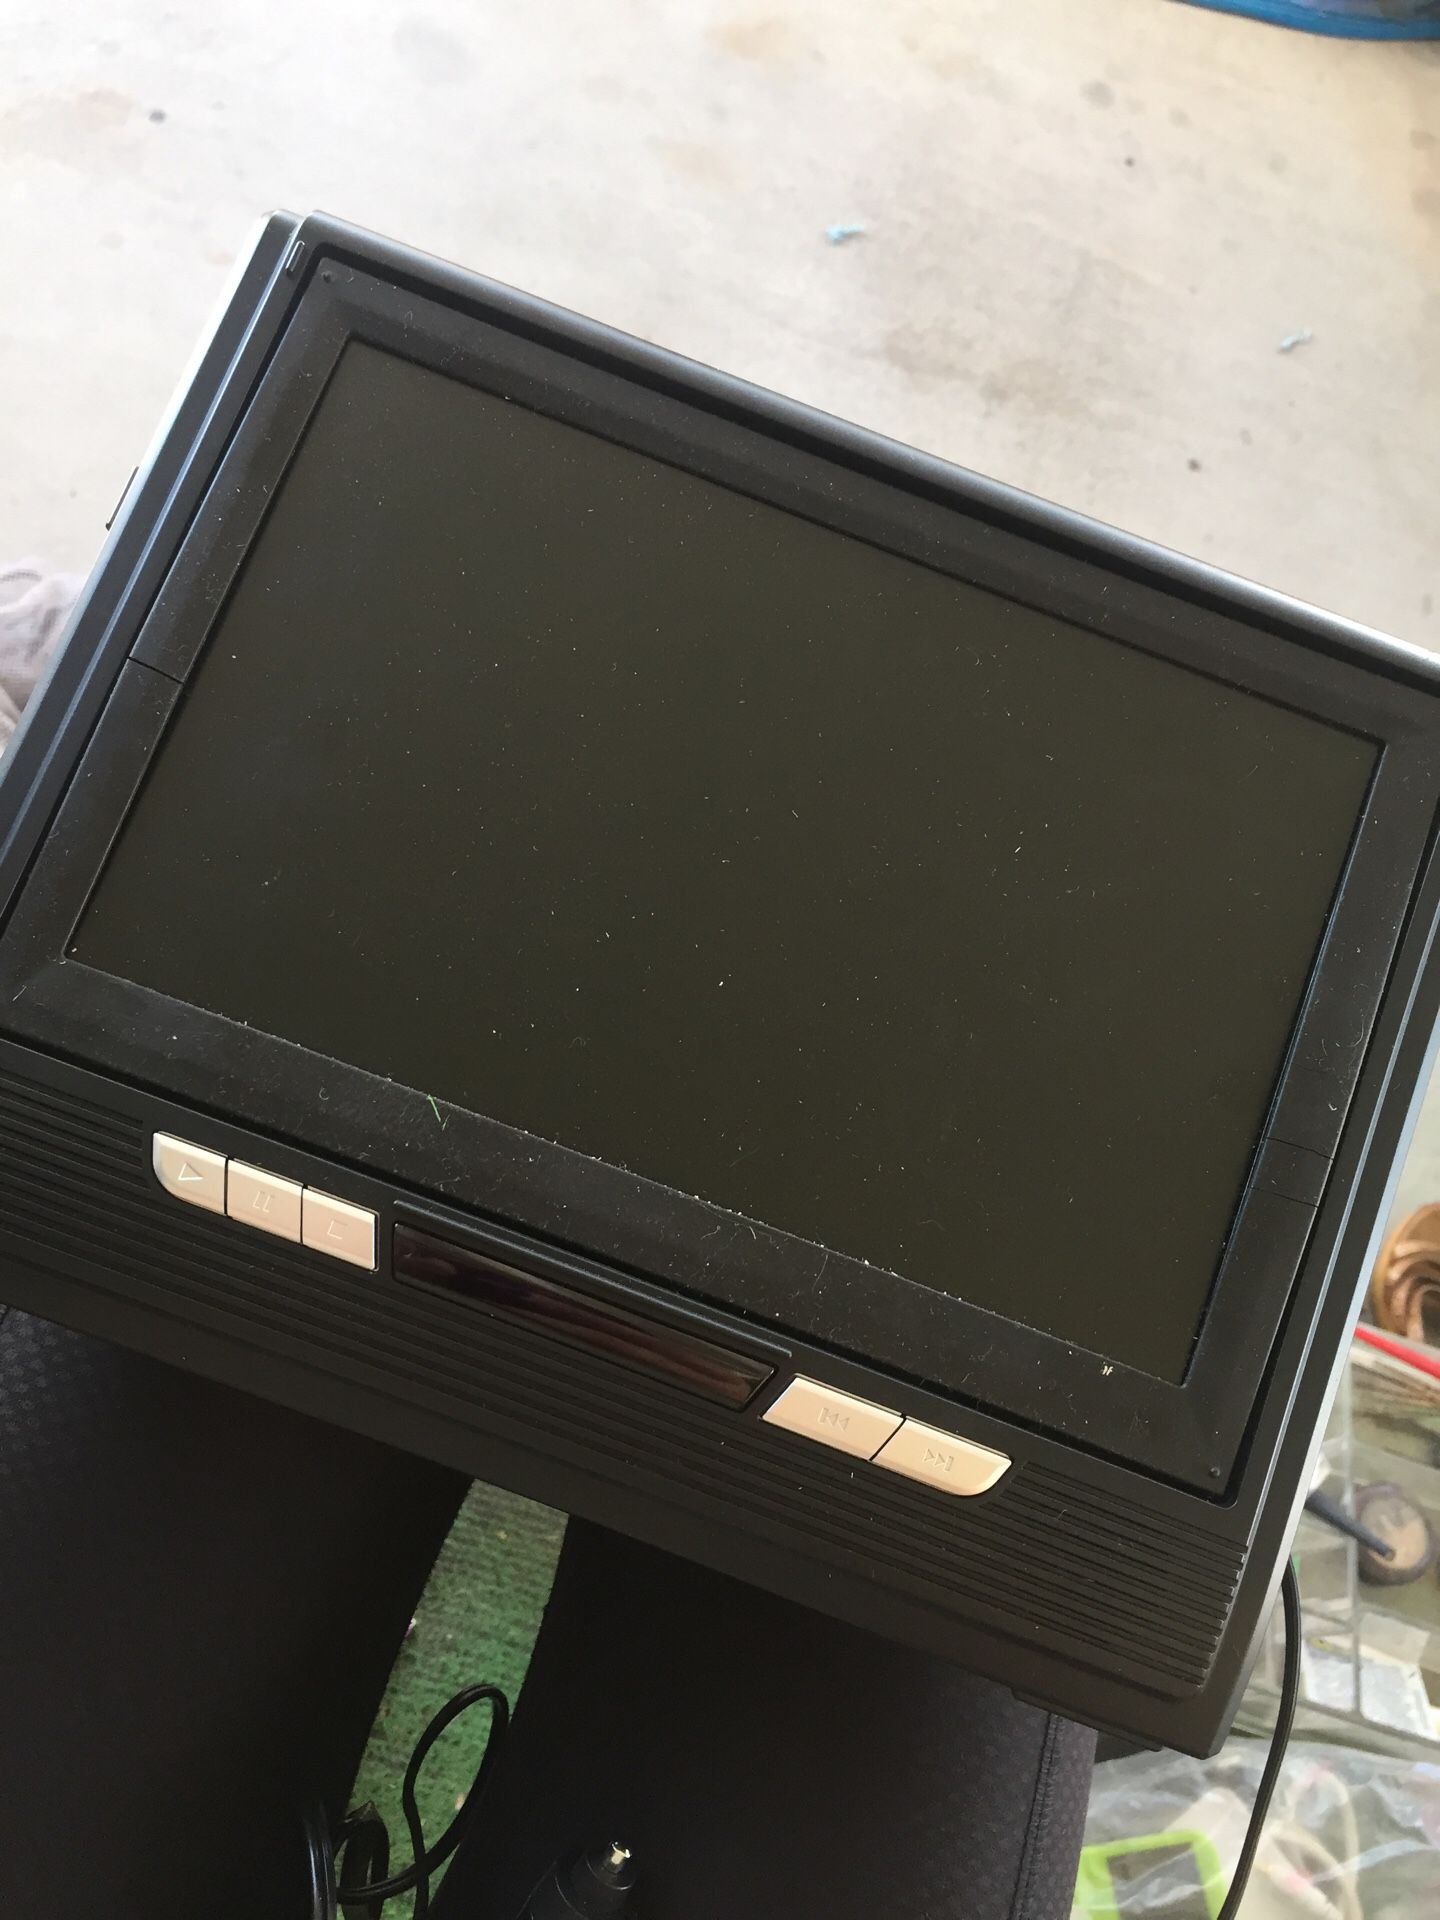 PORTABLE DVD PLAYER WITH STRAPS